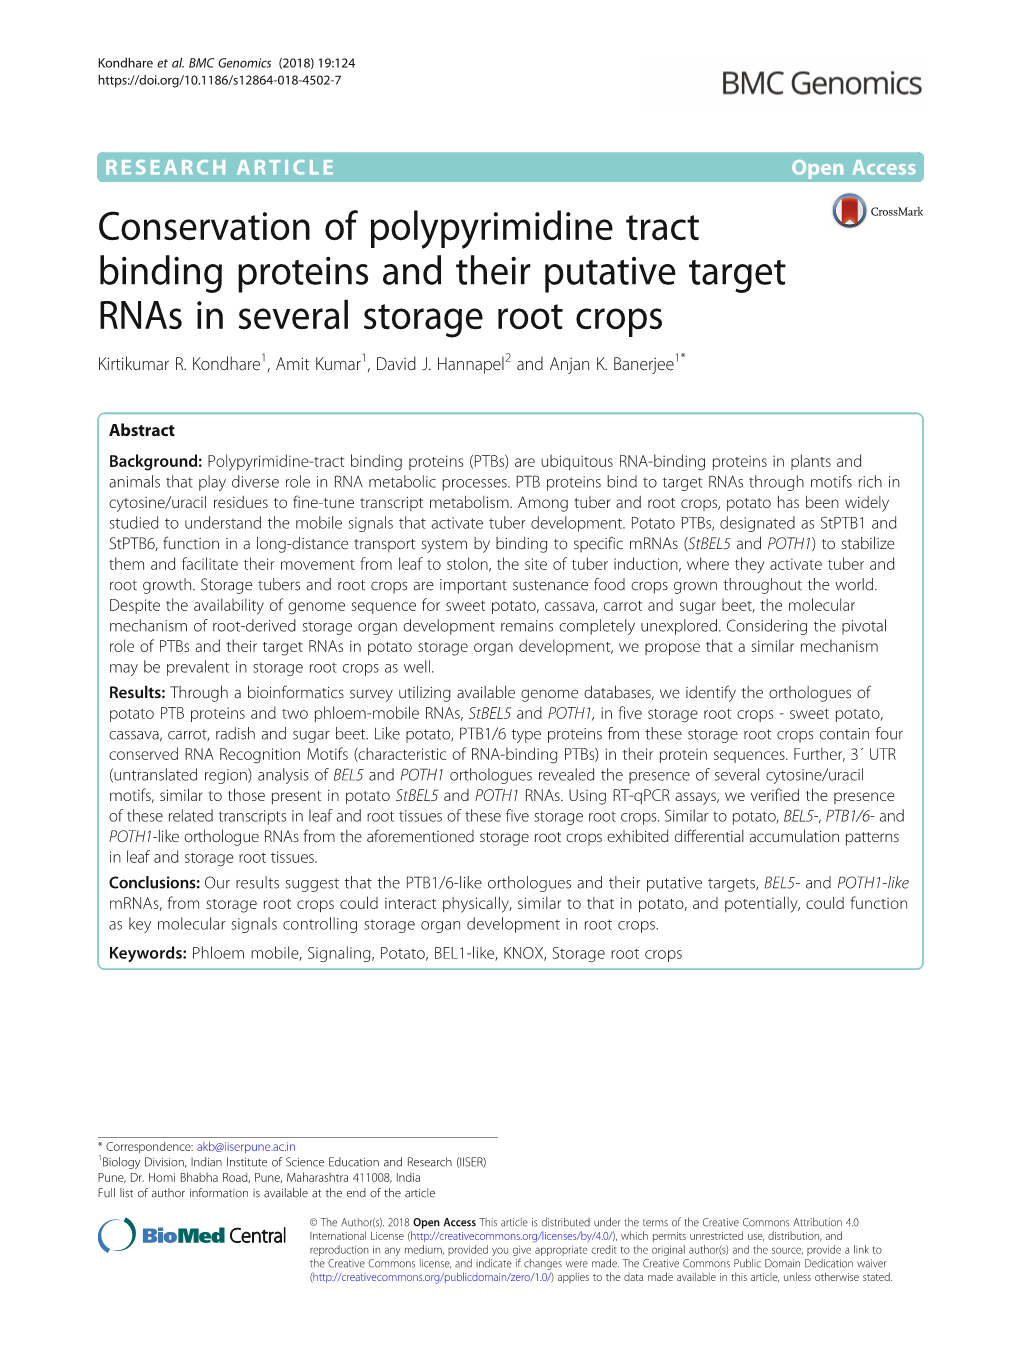 Conservation of Polypyrimidine Tract Binding Proteins and Their Putative Target Rnas in Several Storage Root Crops Kirtikumar R